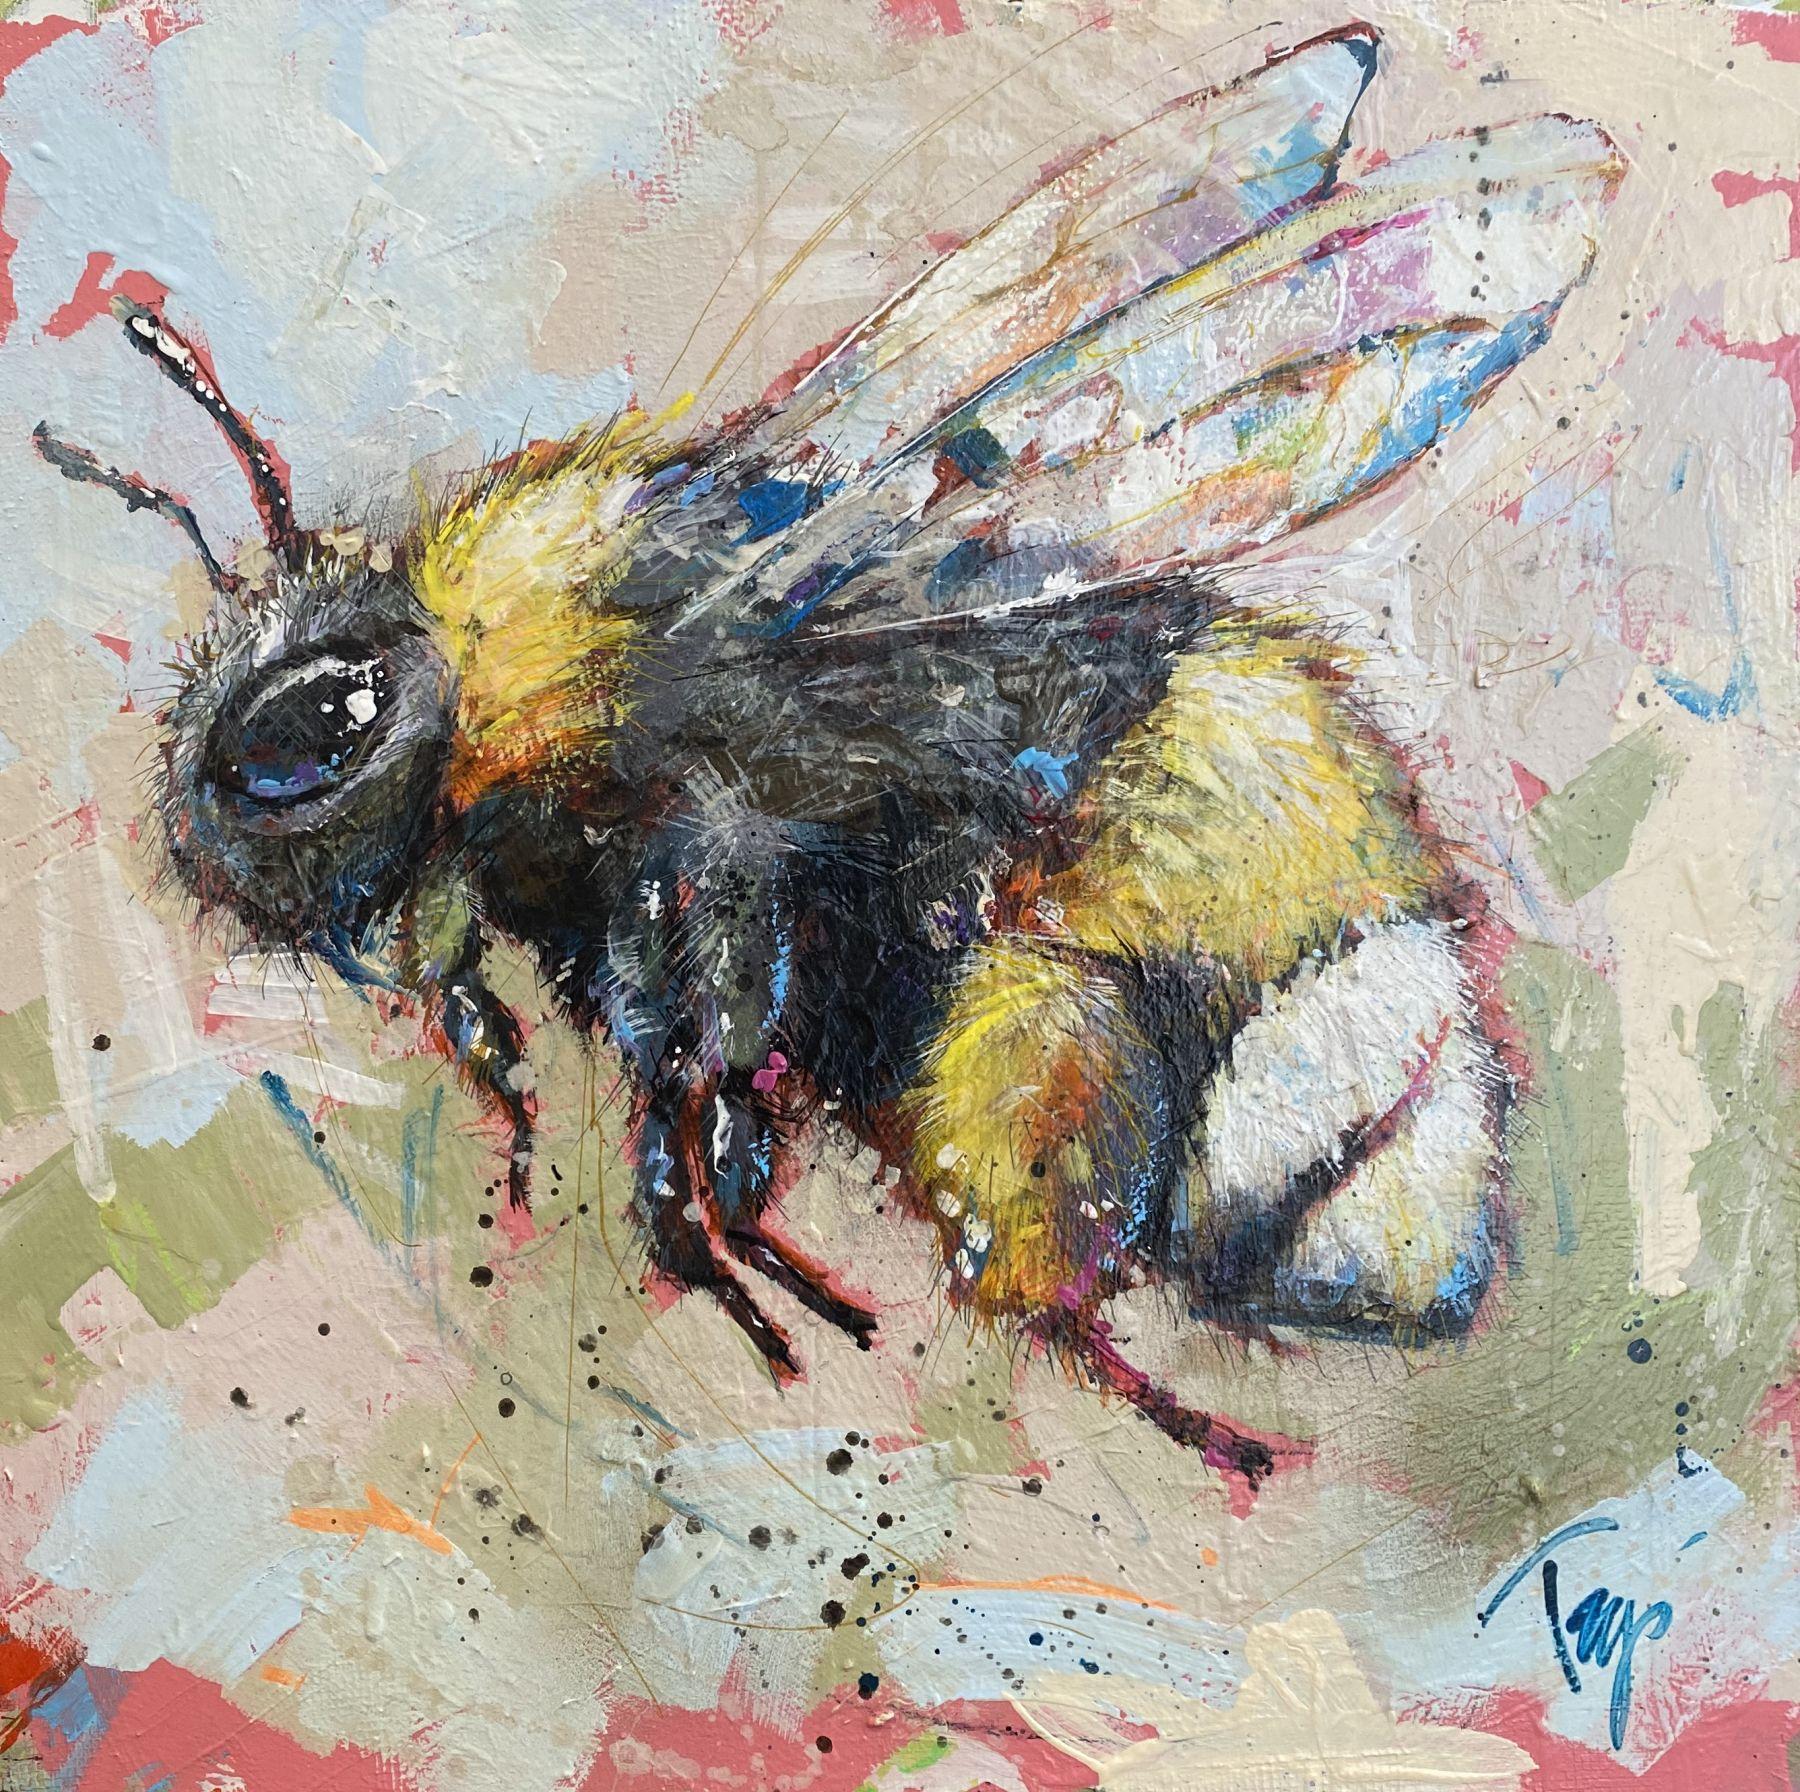 Trip Park, "Daisy Dancer", 24x24 Colorful Bumblebee Oil Painting on Canvas